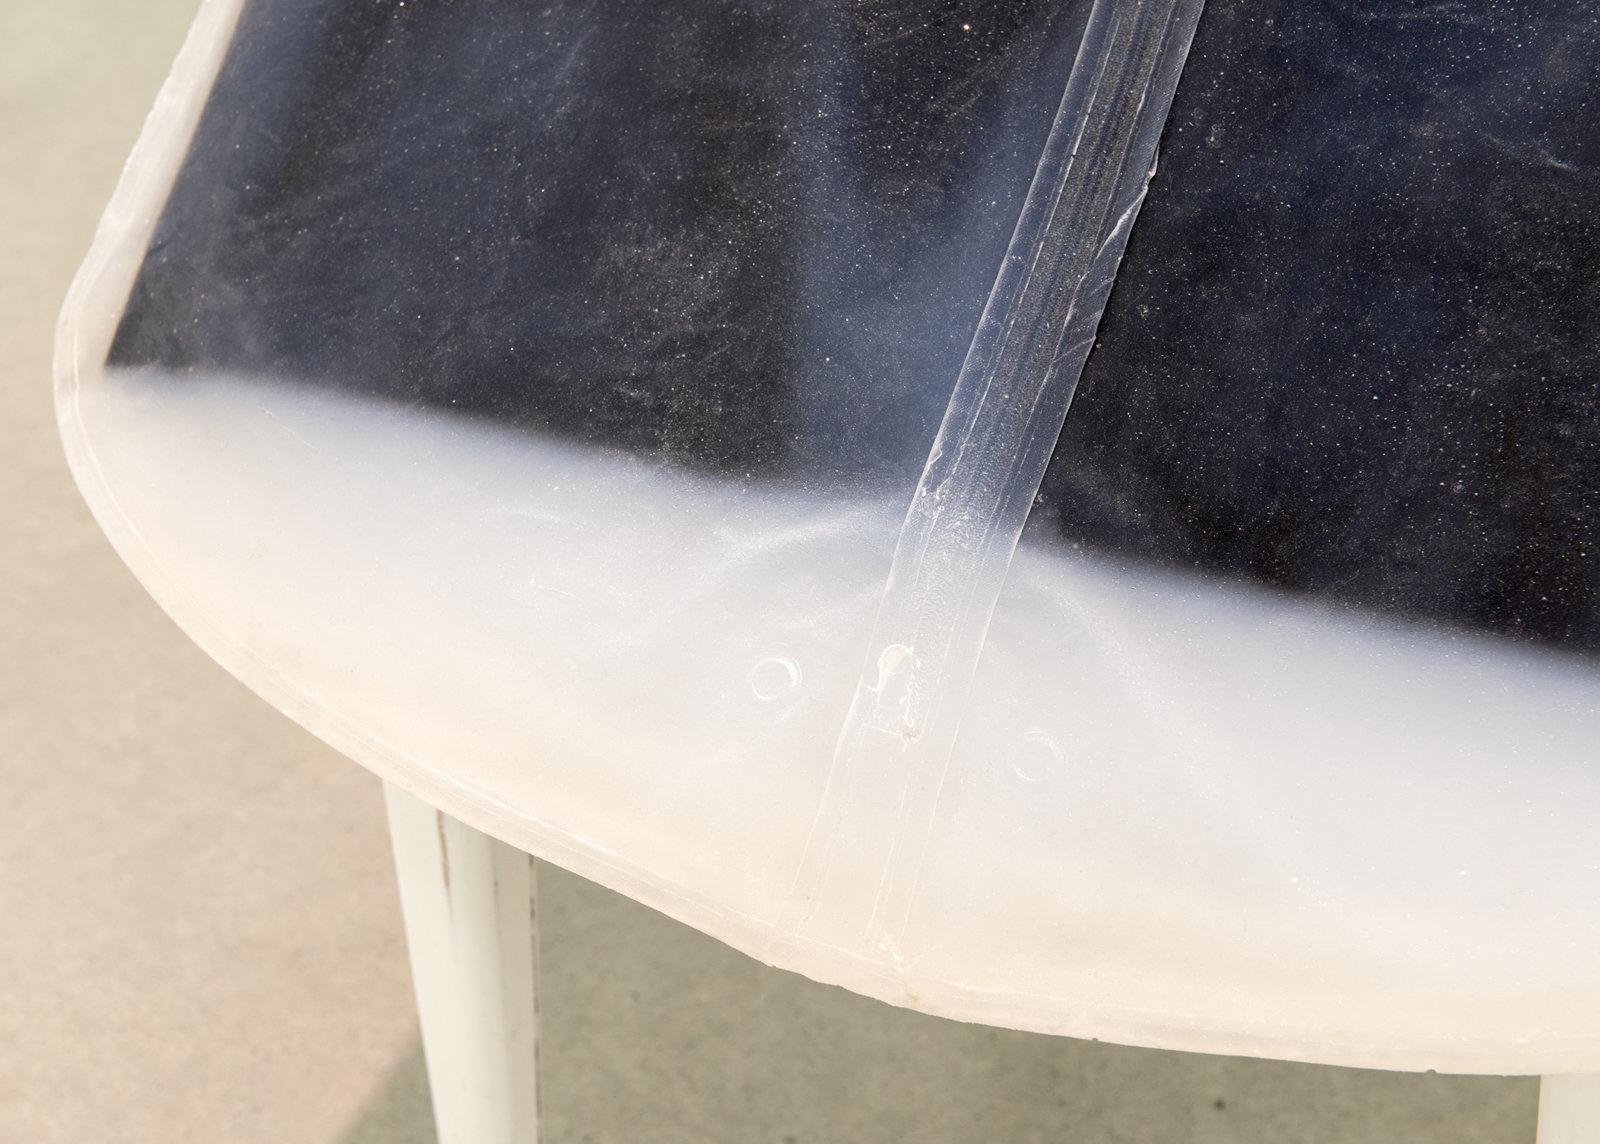 Liz Magor, Formal I (detail), 2012, platinum-cure silicone rubber, chair, 32 x 24 x 32 in. (81 x 61 x 81 cm)